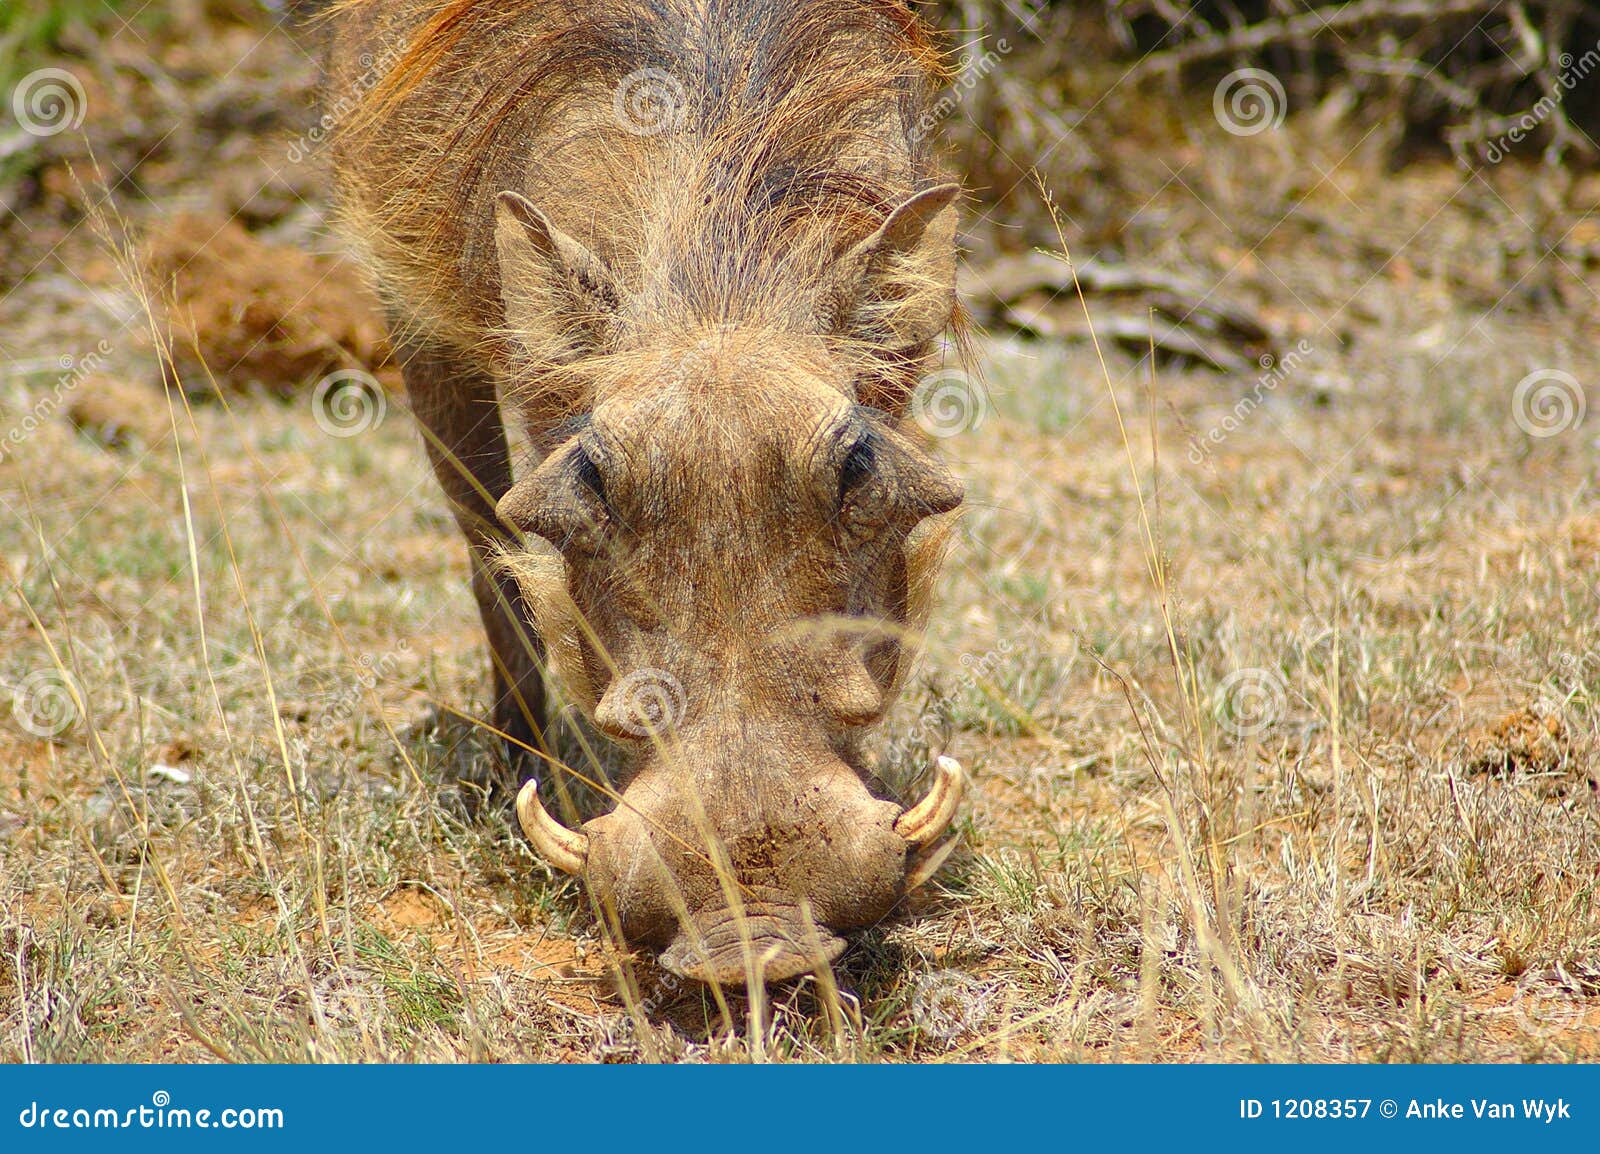 warthog in south africa